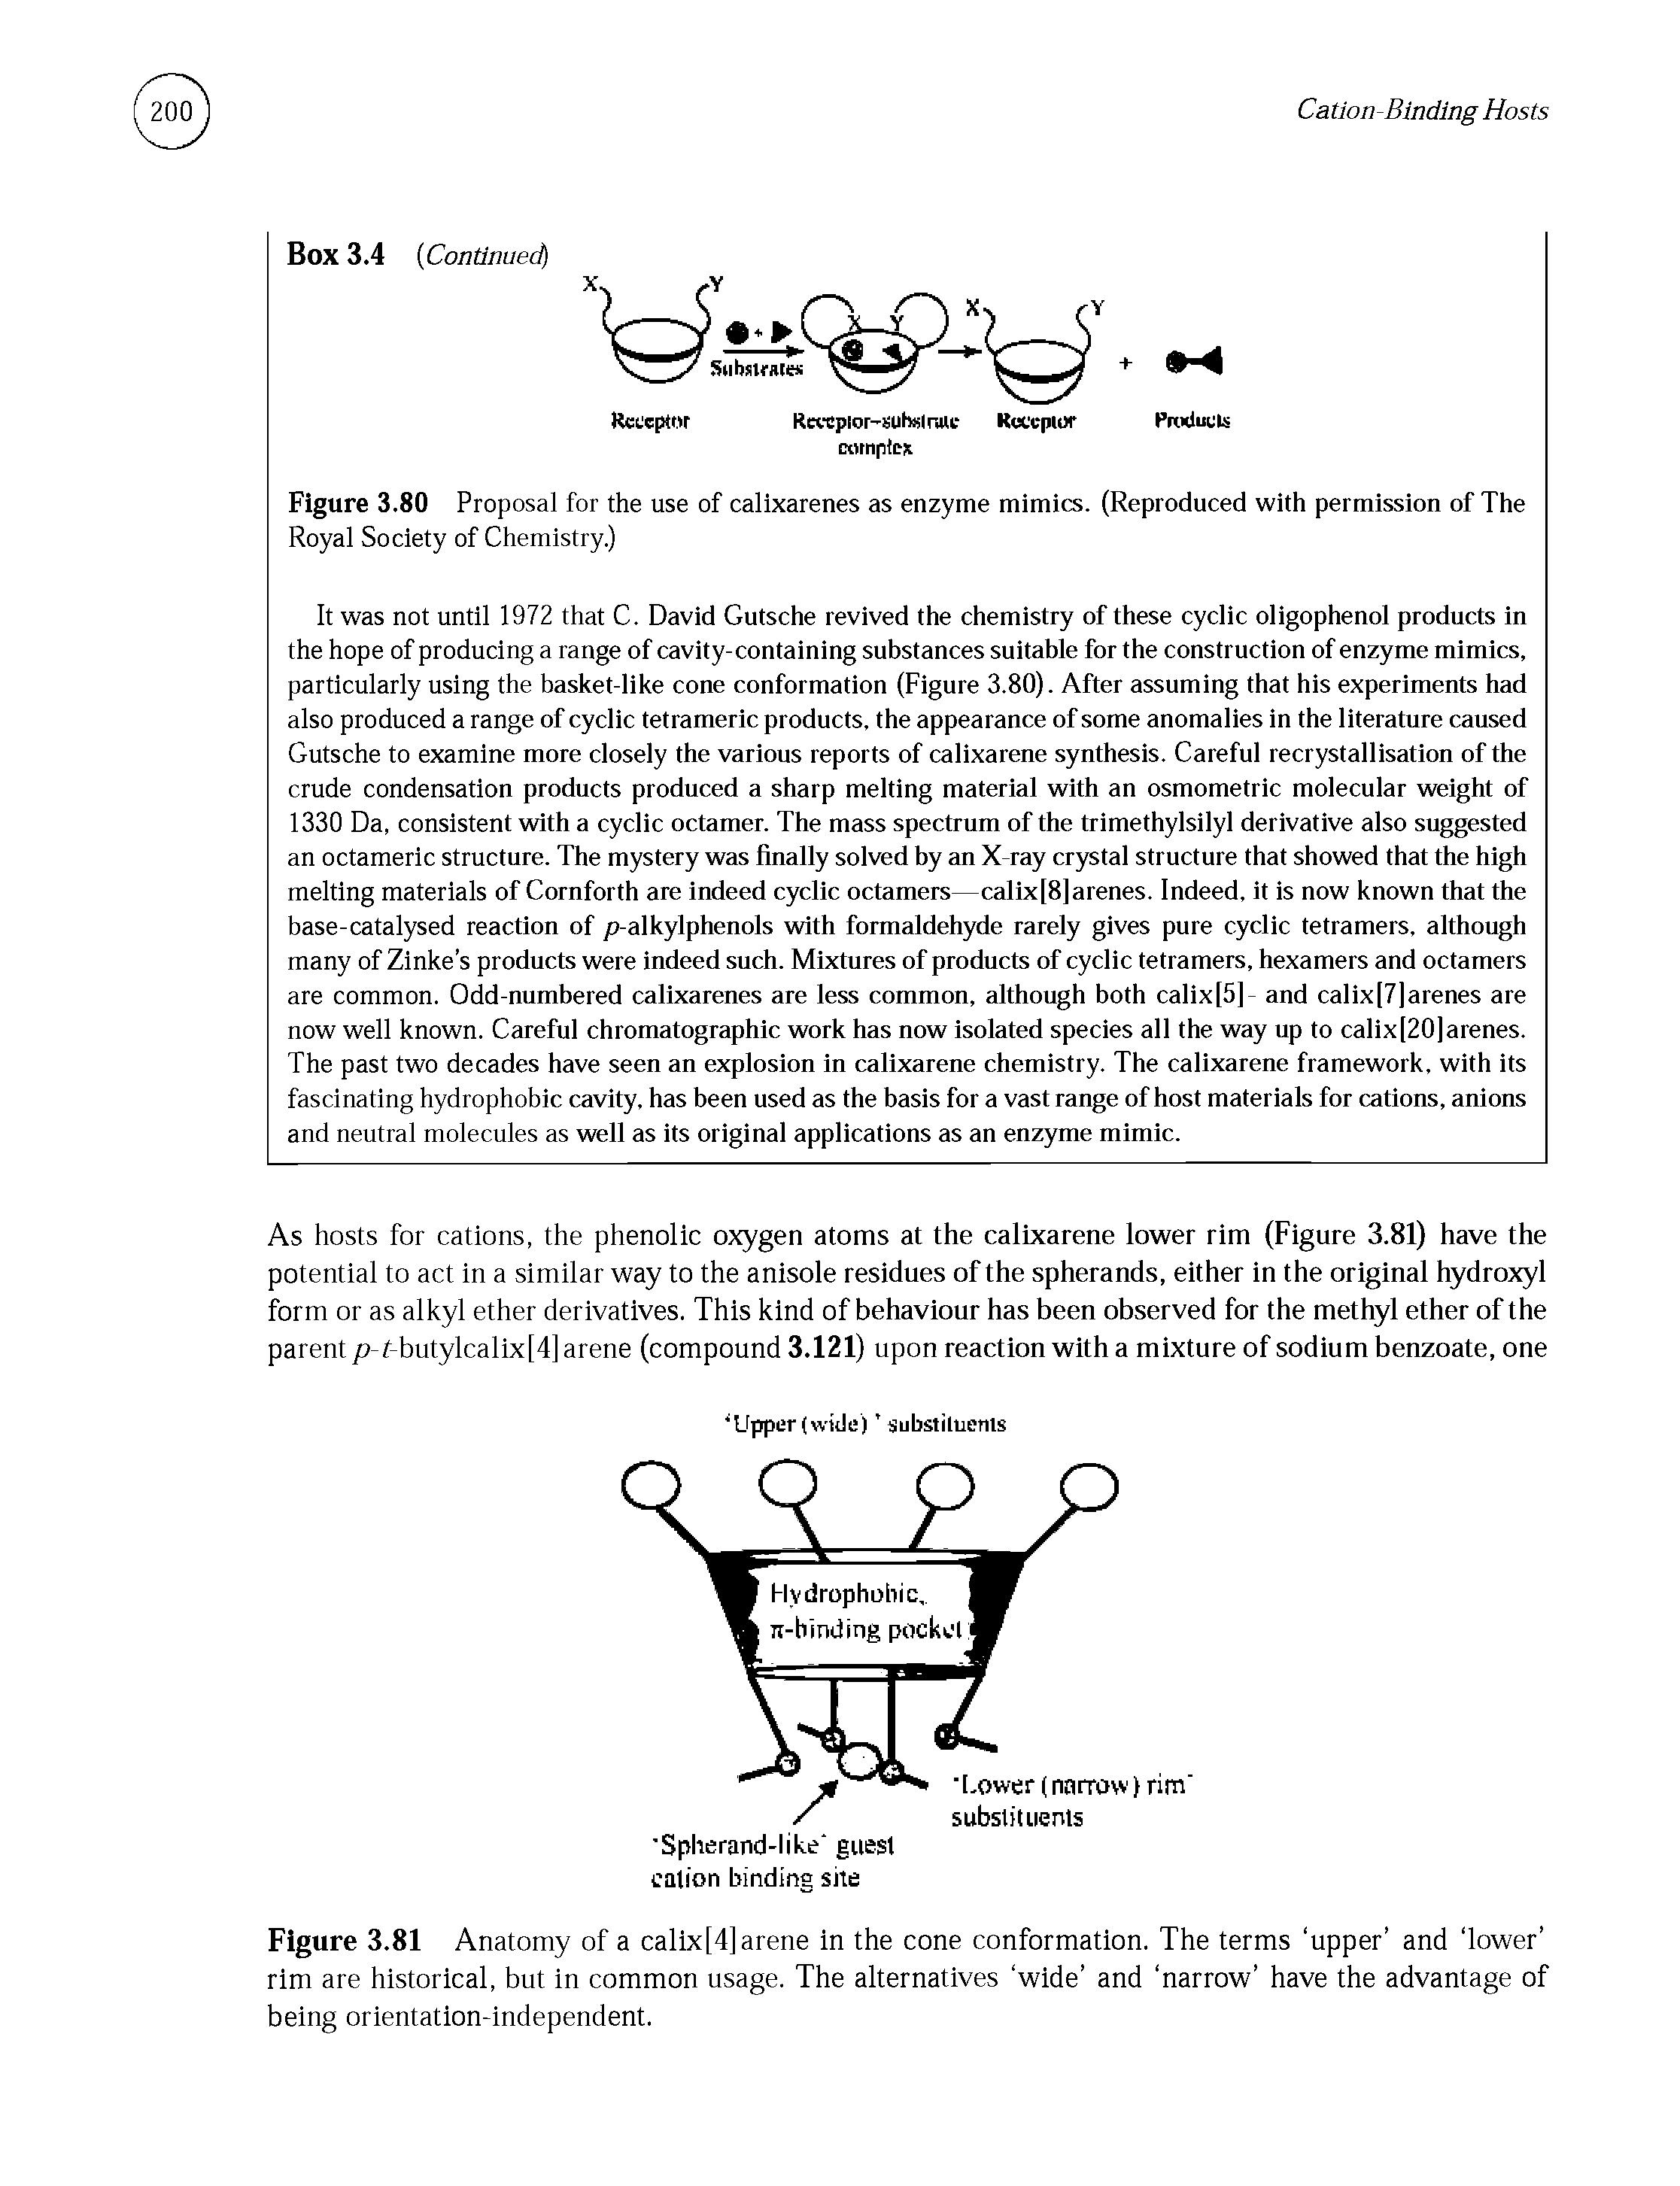 Figure 3.80 Proposal for the use of calixarenes as enzyme mimics. (Reproduced with permission of The Royal Society of Chemistry.)...